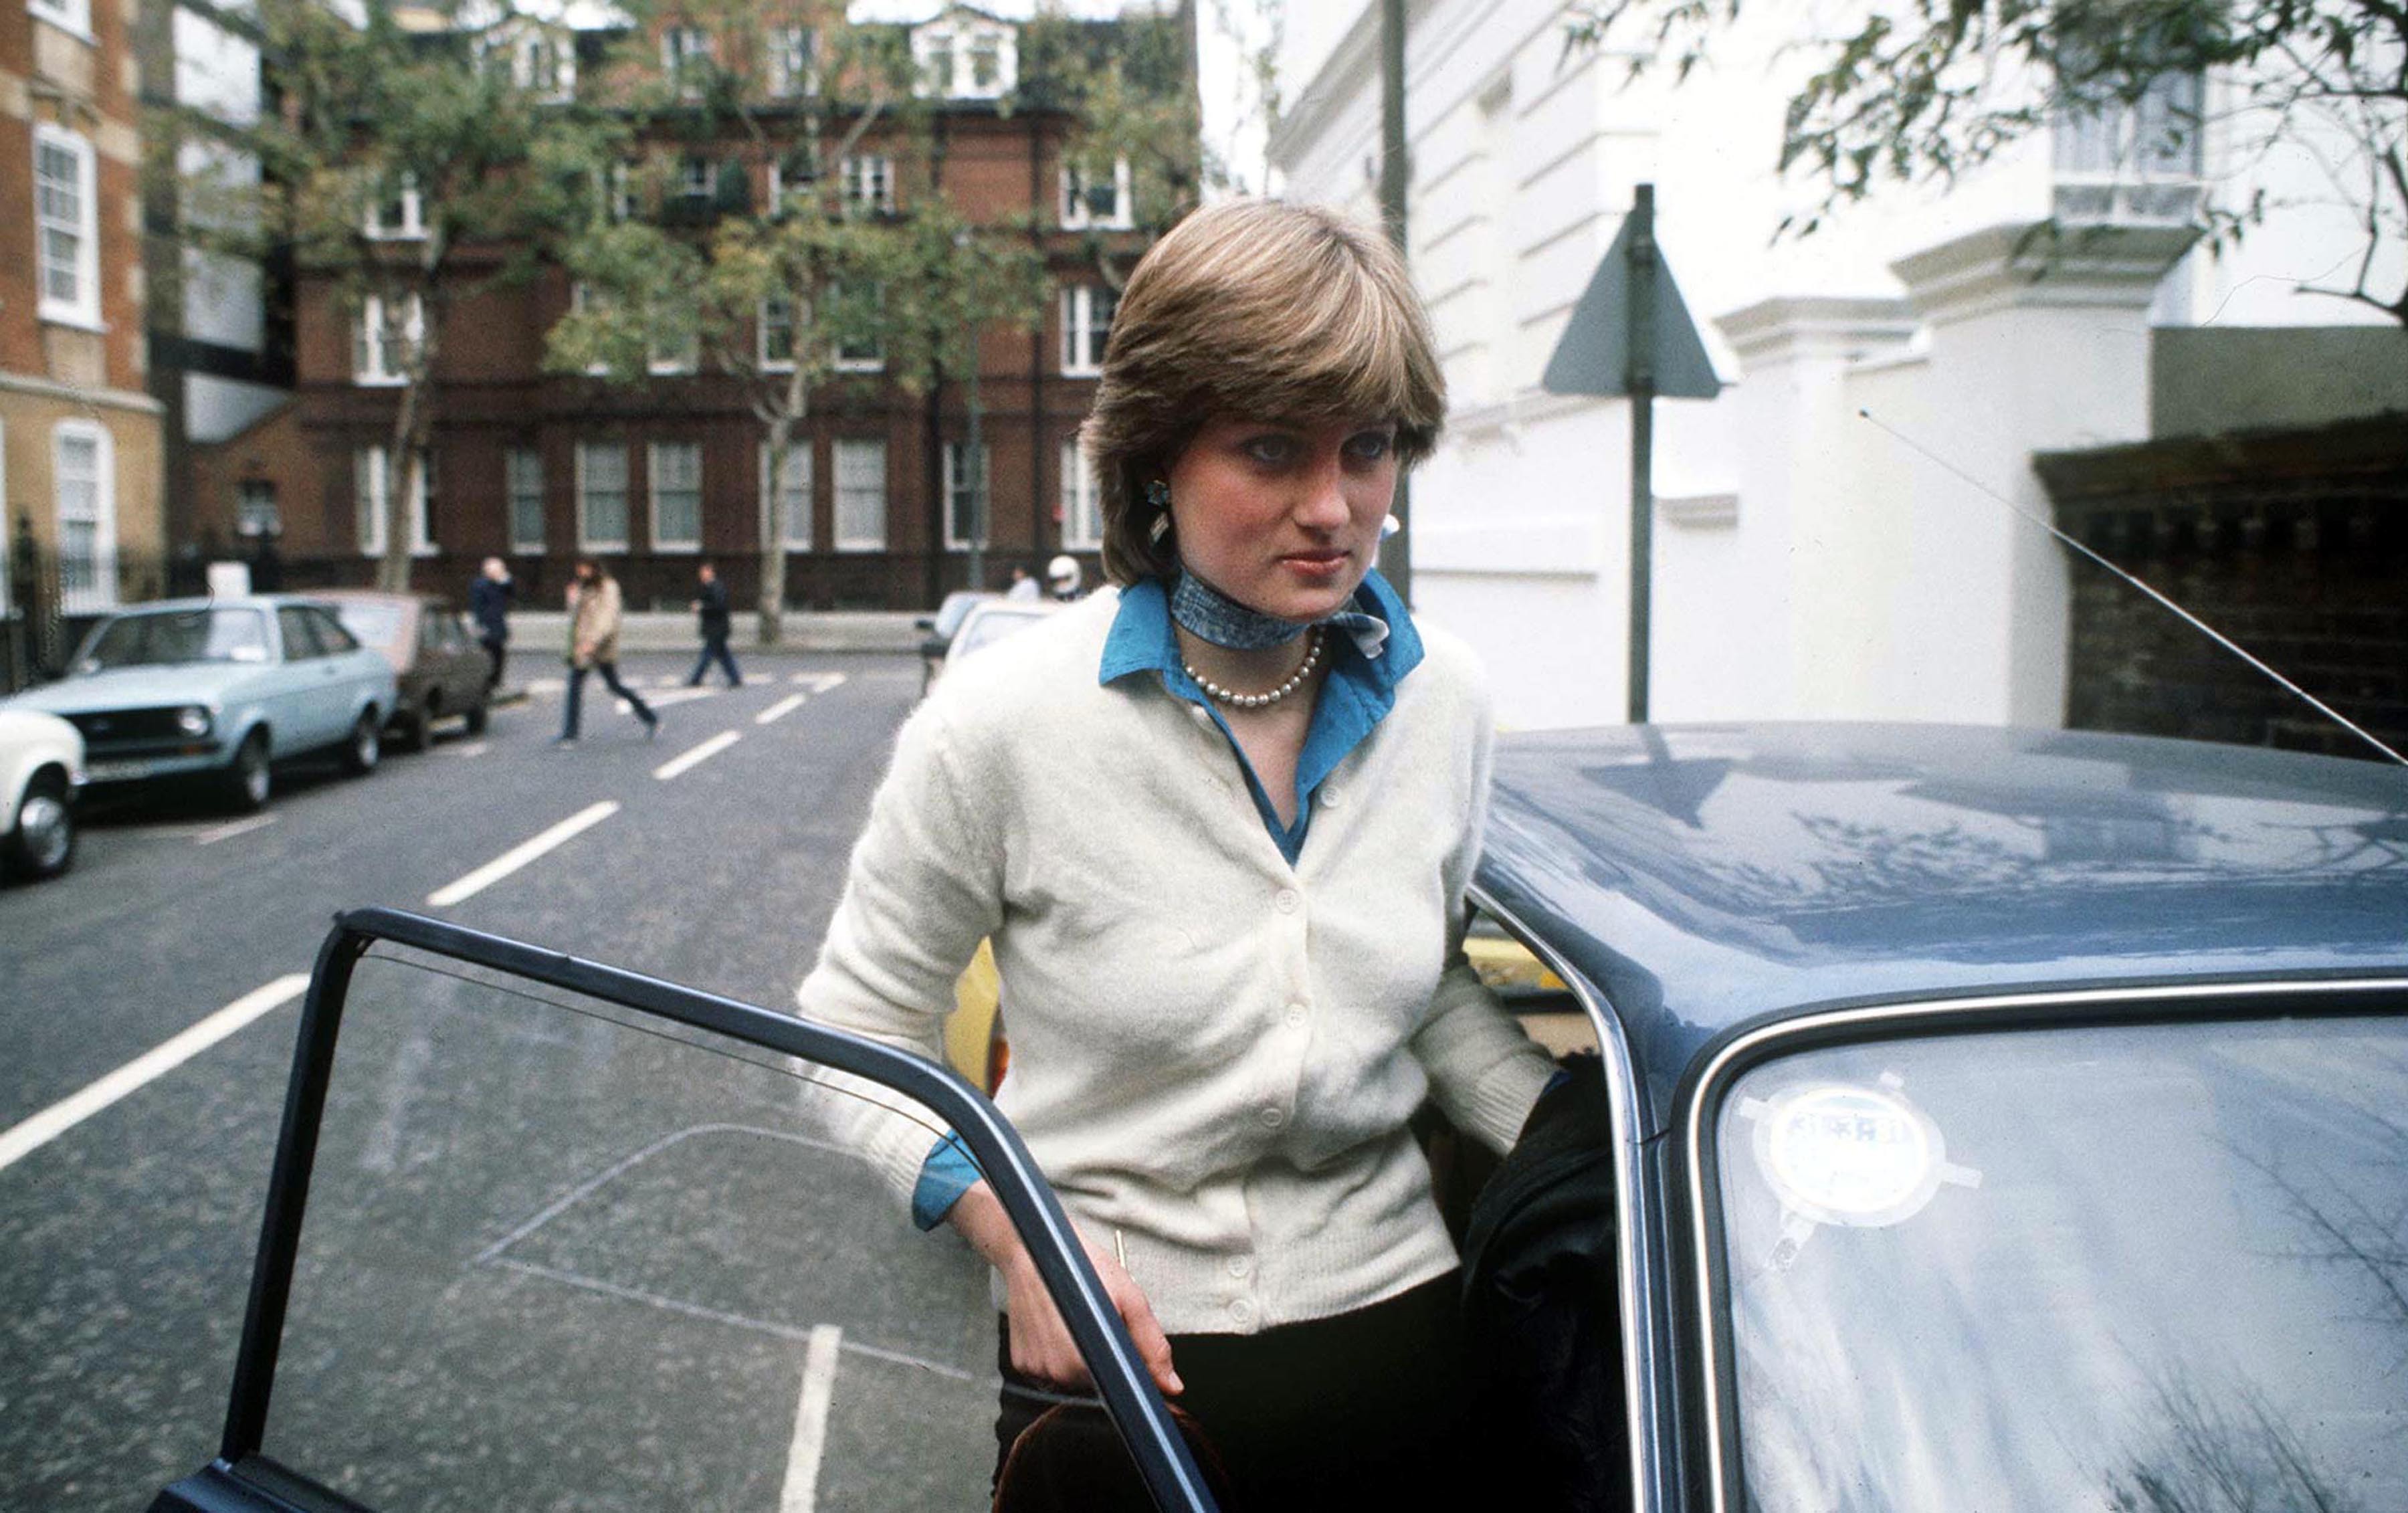 Lady Diana Spencer outside her flat in Coleherne Court, London, before her engagement to the Prince of Wales, December 1980. (Photo by Jayne Fincher/Princess Diana Archive/Getty Images) (Foto: Getty Images)